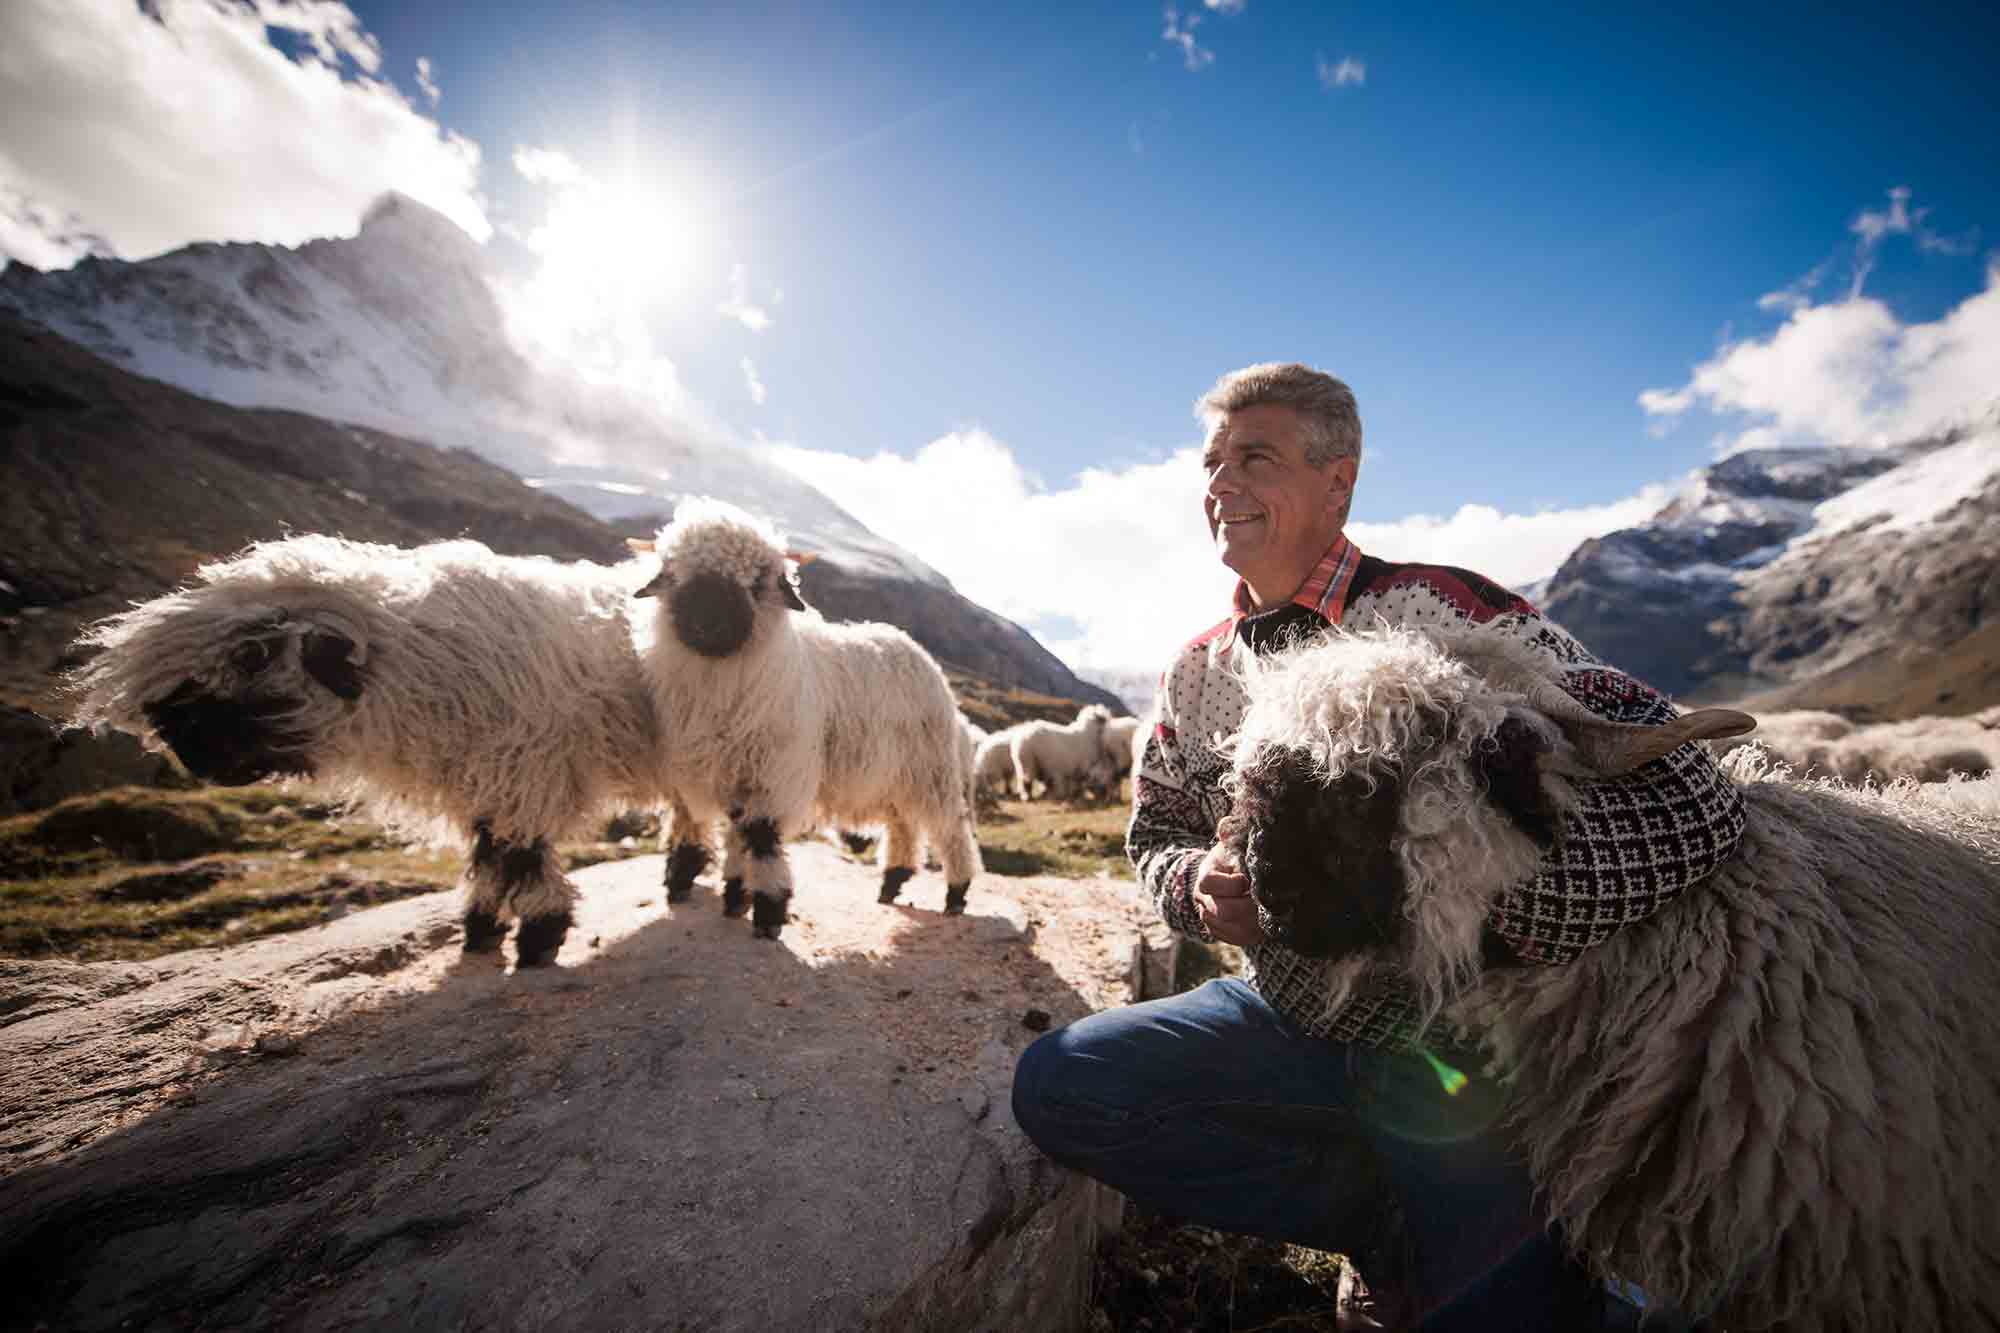 Paul Julen, host at the Romantik Hotel in Zermatt, owns the largest breed in the world with 300 black noses.